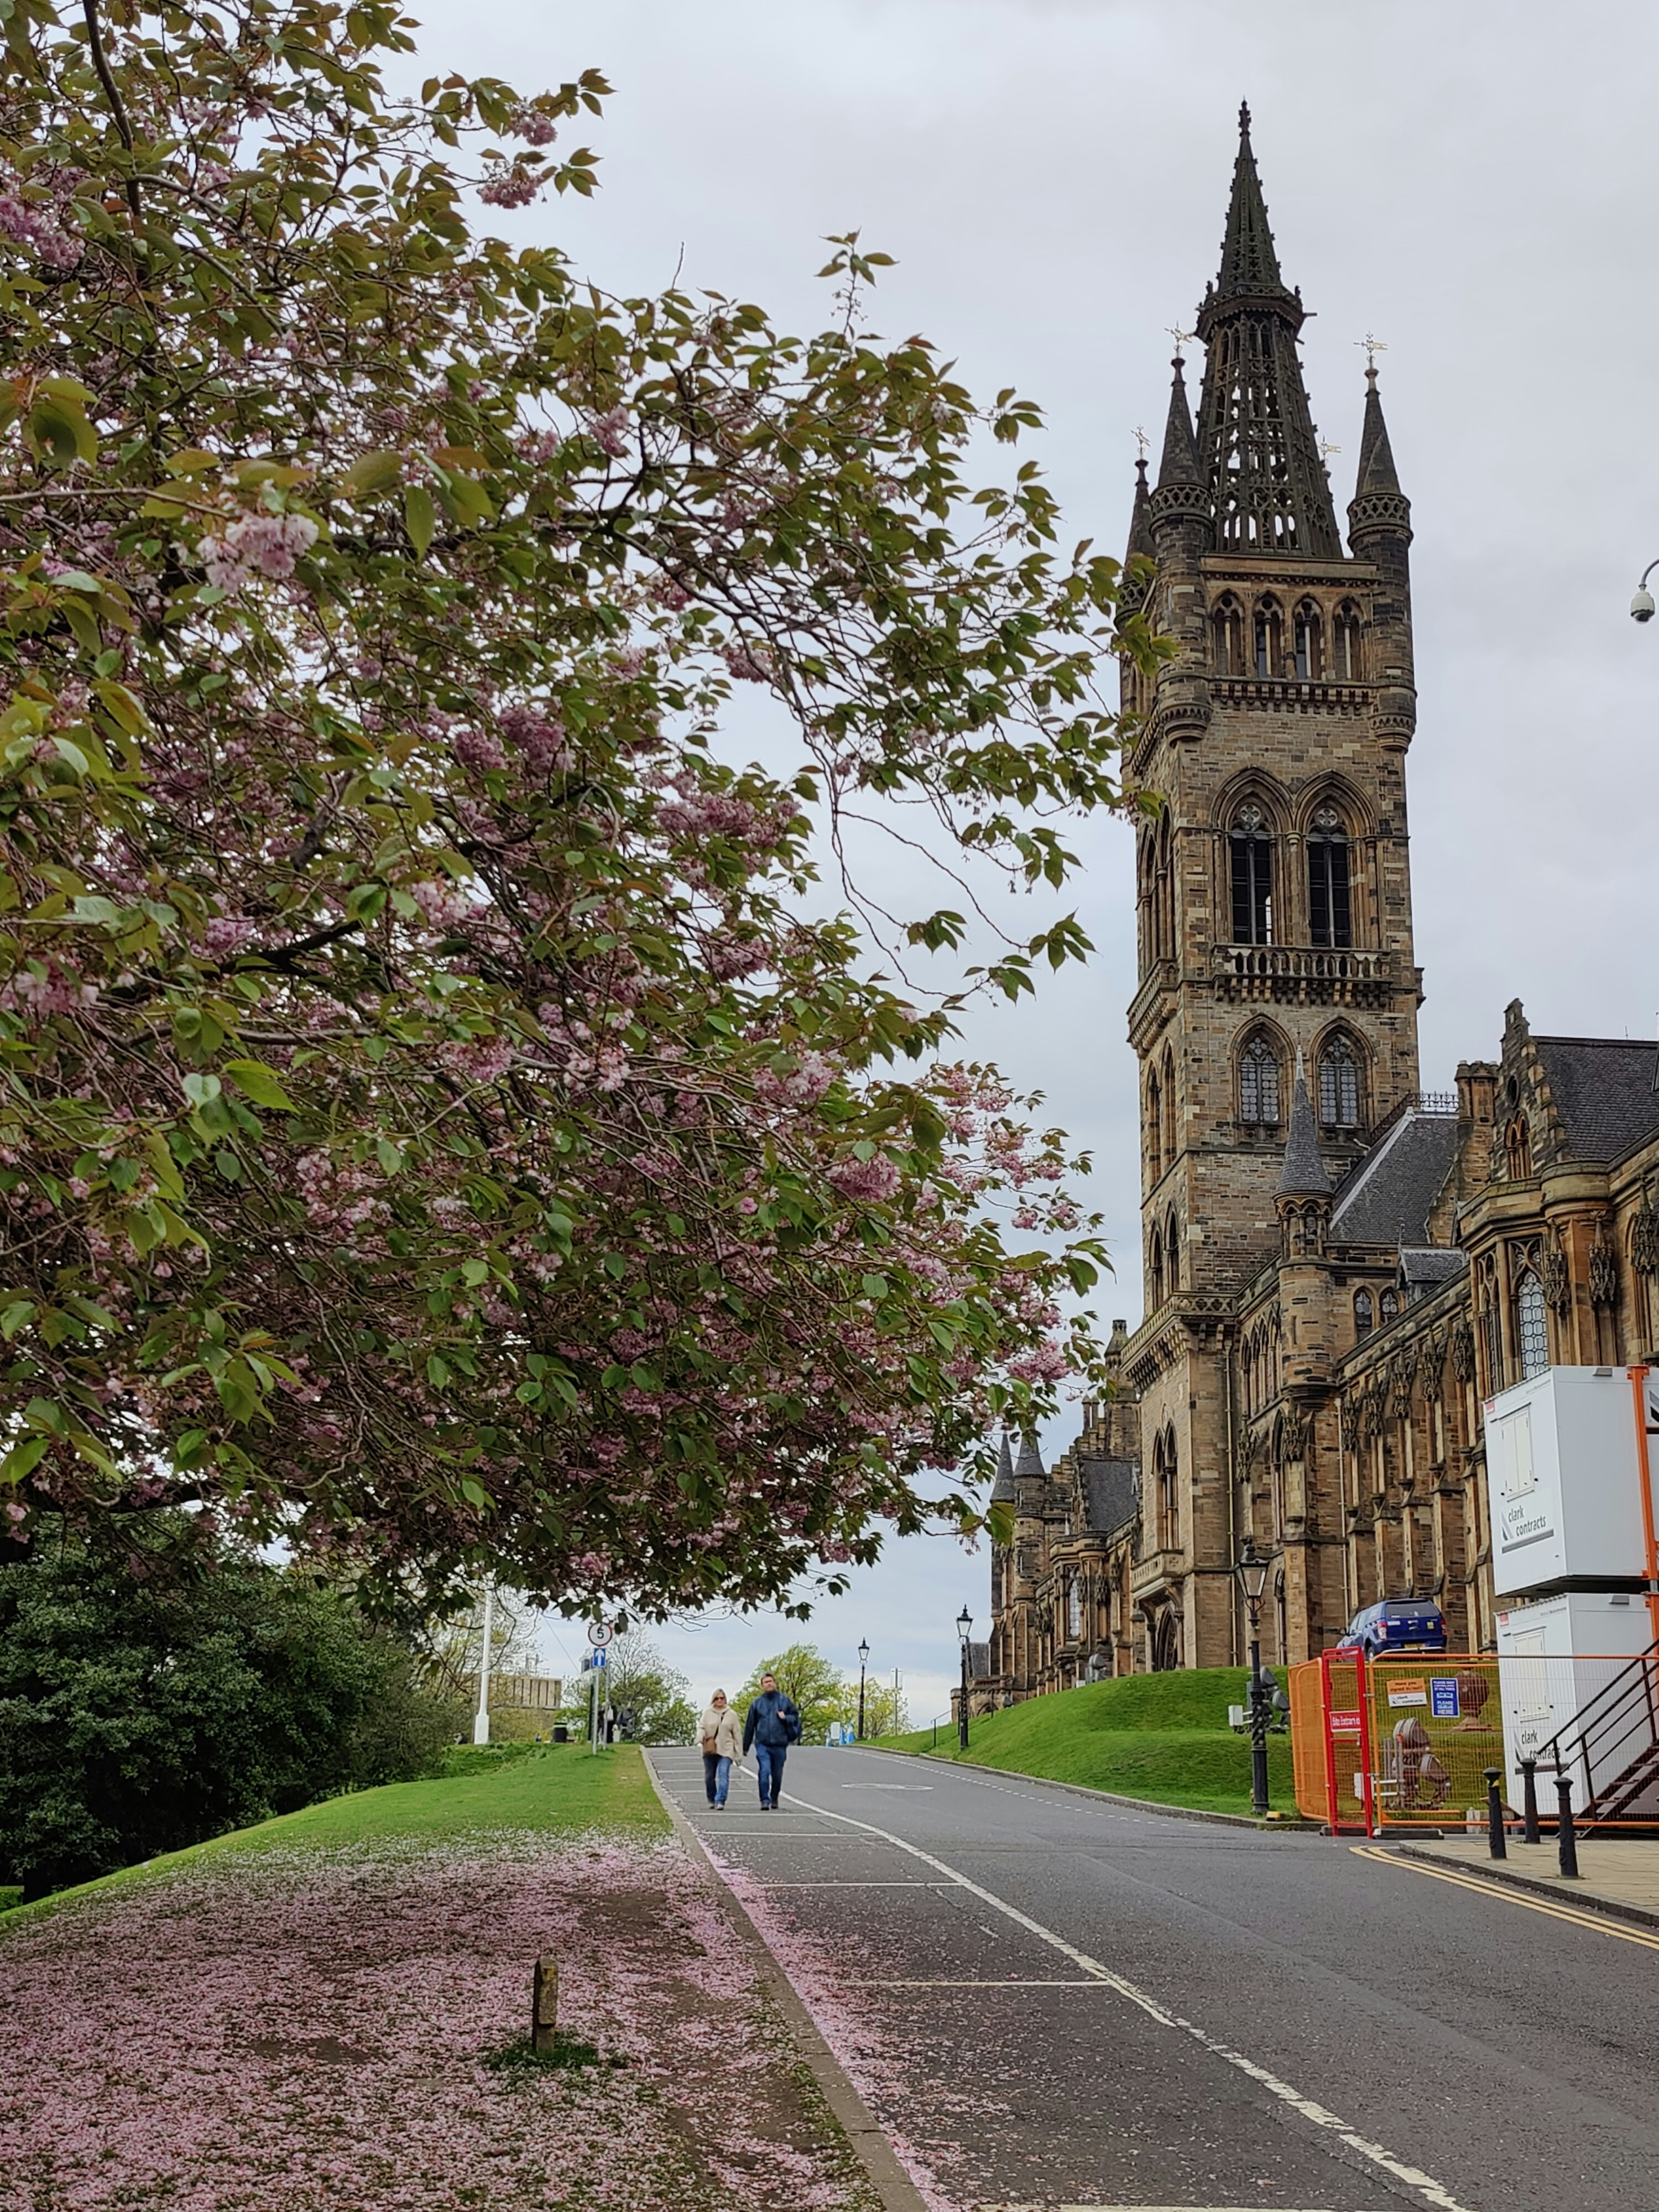 Some pretty spring vibes to brighten the day as the University of Glasgow looks on, majestic as usual.